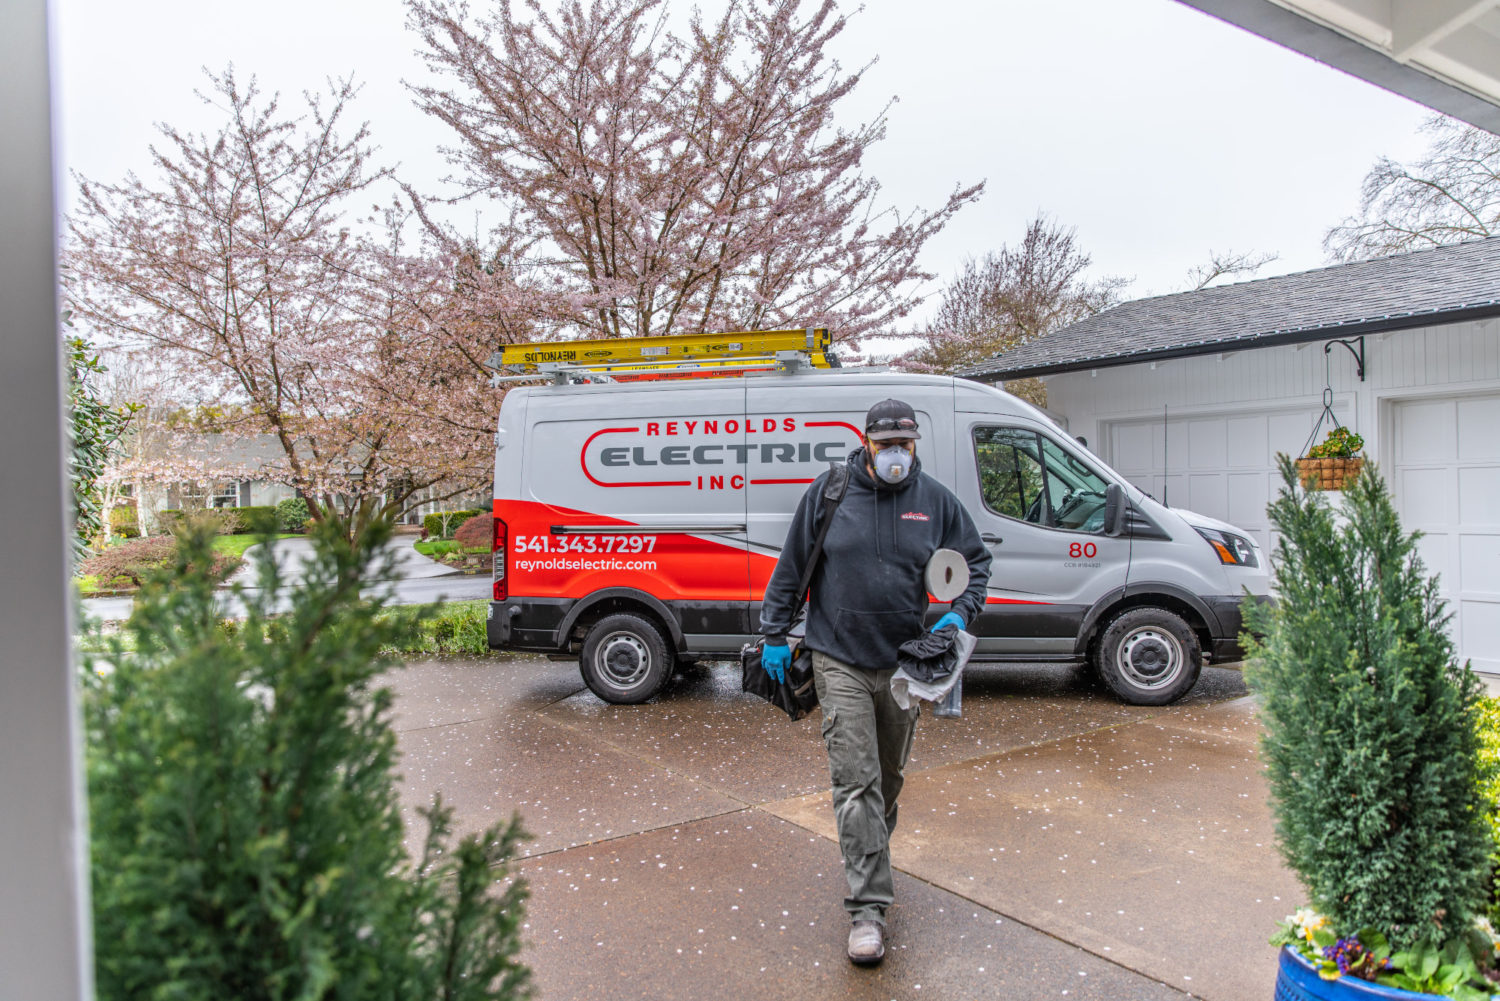 A Reynolds Electric and Plumbing technician walking toward a home with the service van behind him.